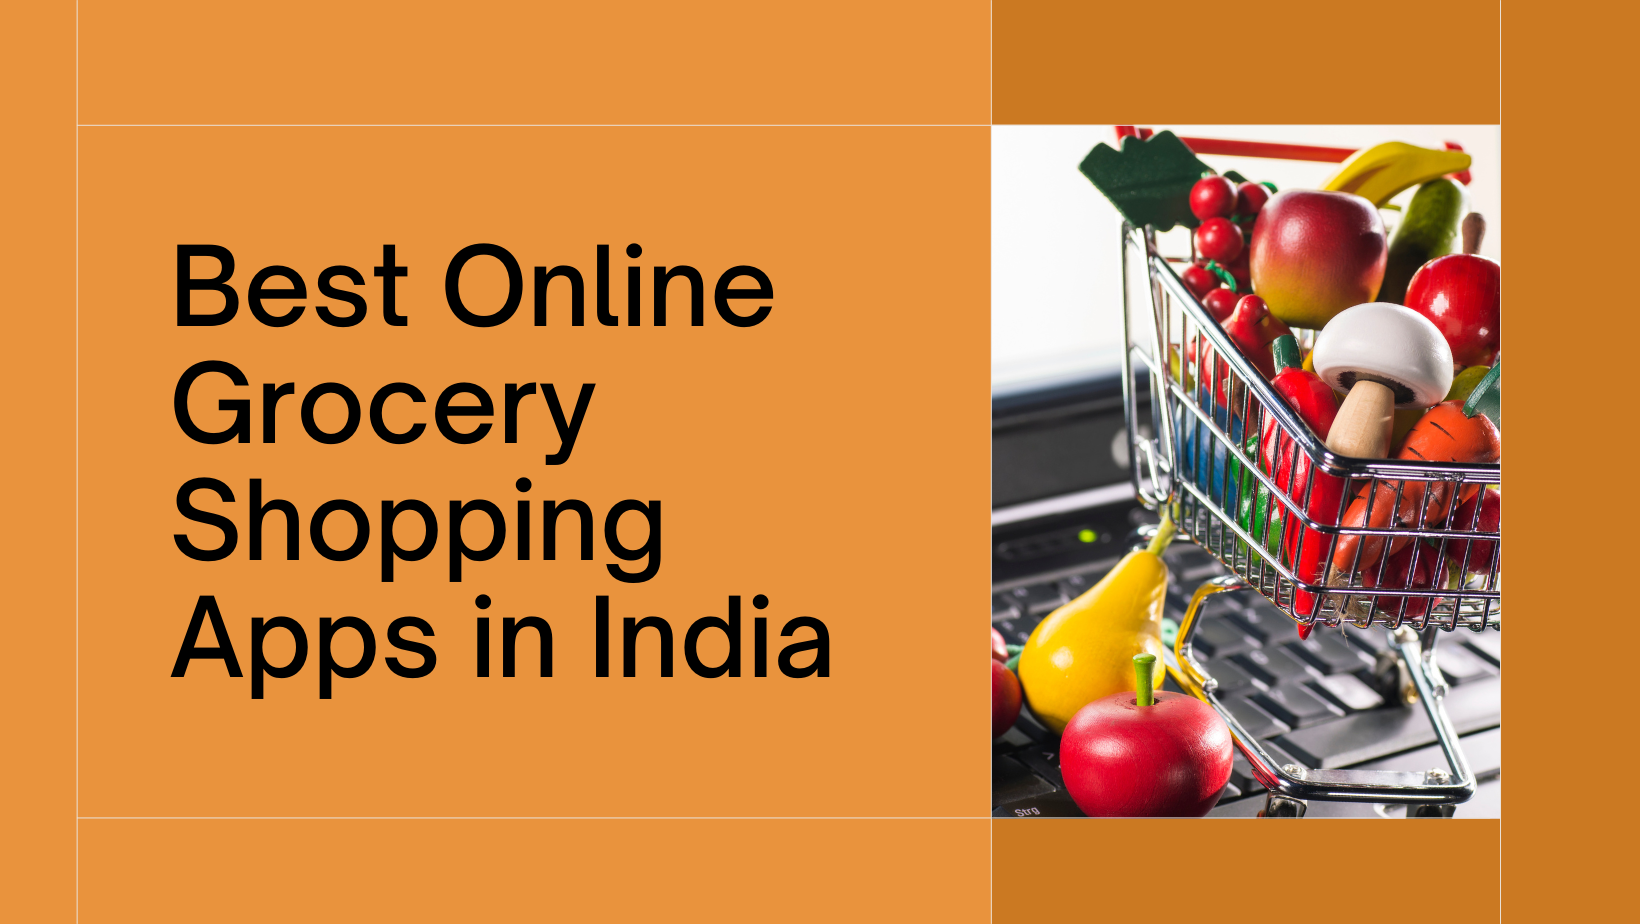 Best Online Grocery Shopping Apps in India